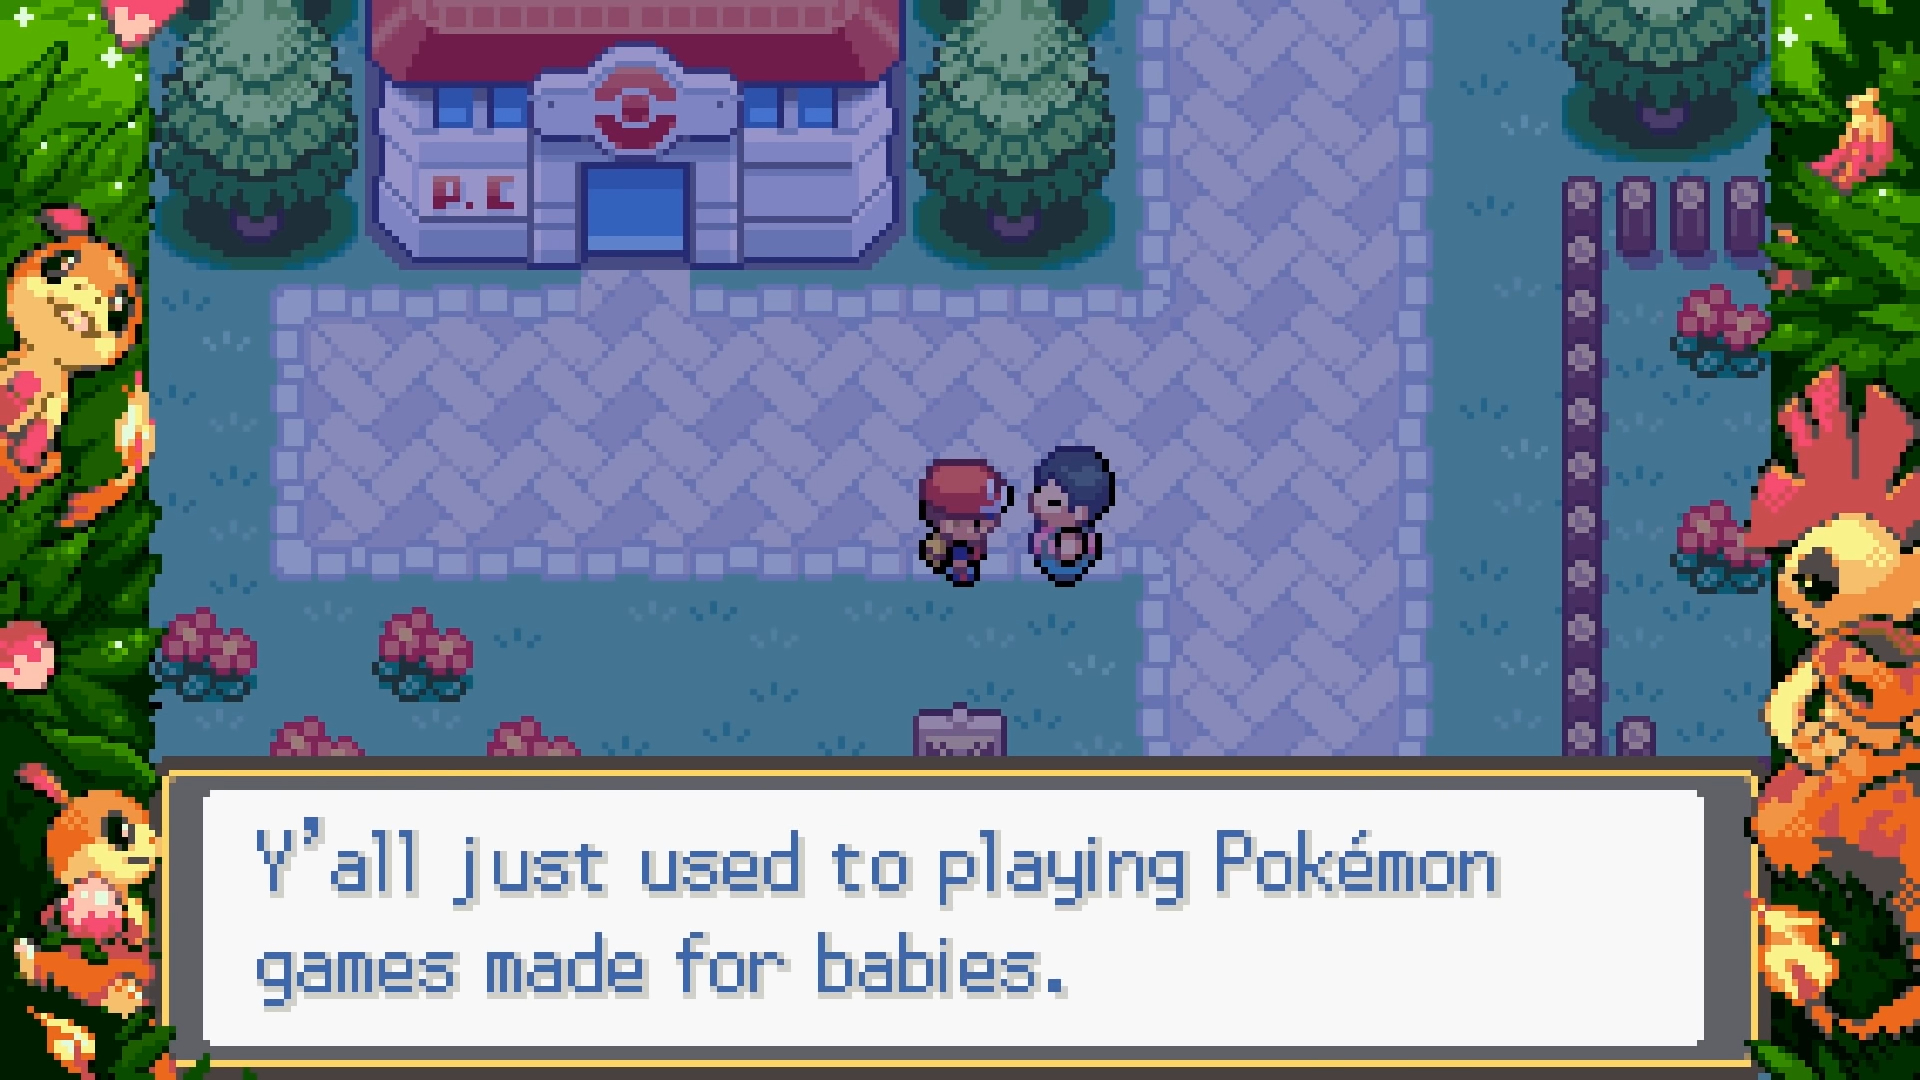 I am working on a Pokemon Black 2 ROM Hack context for this